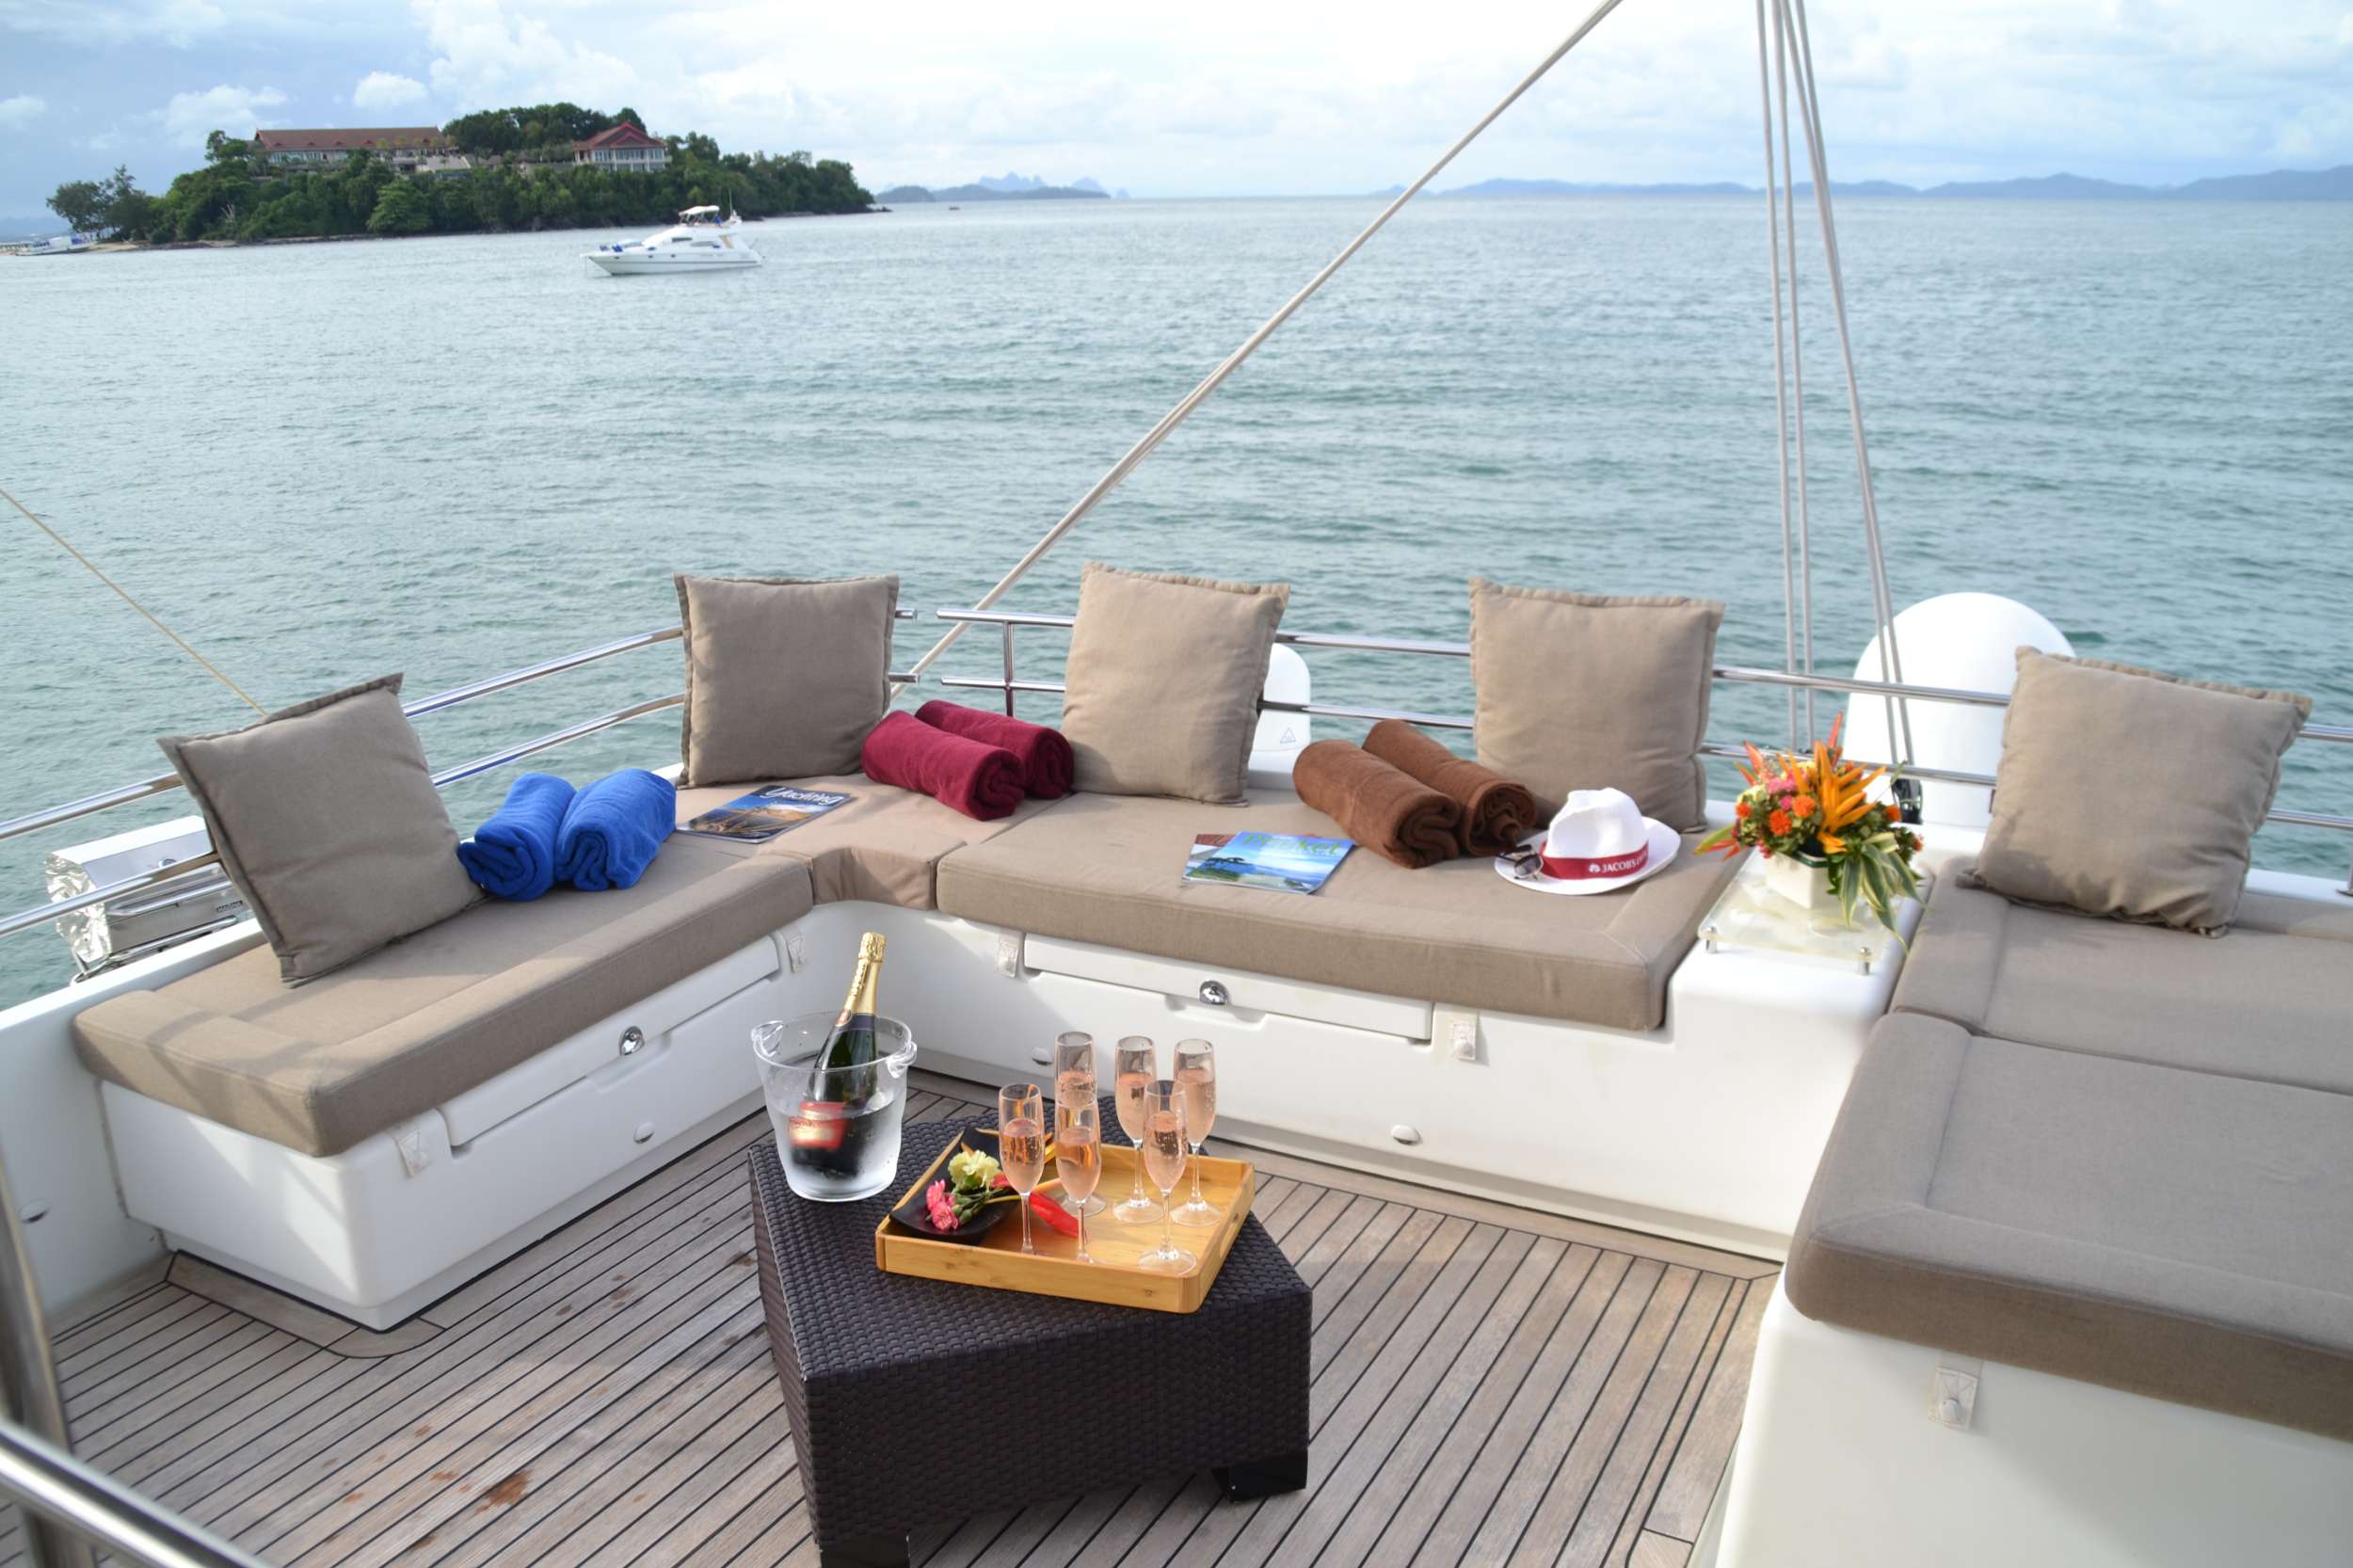 00SEVEN - Yacht Charter Malaysia & Boat hire in SE Asia 5